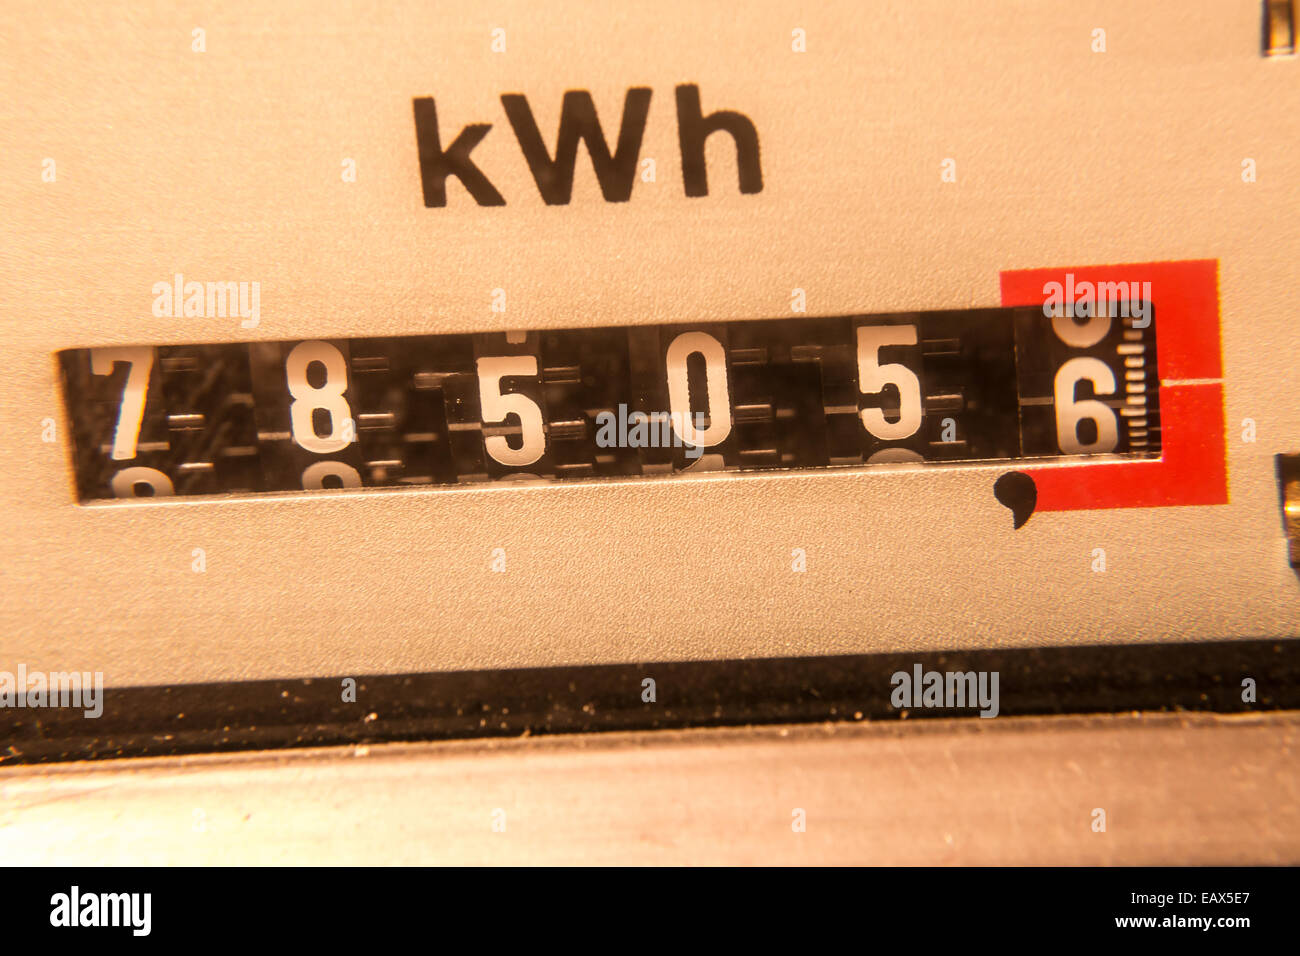 electricity meter background (kwh) Stock Photo